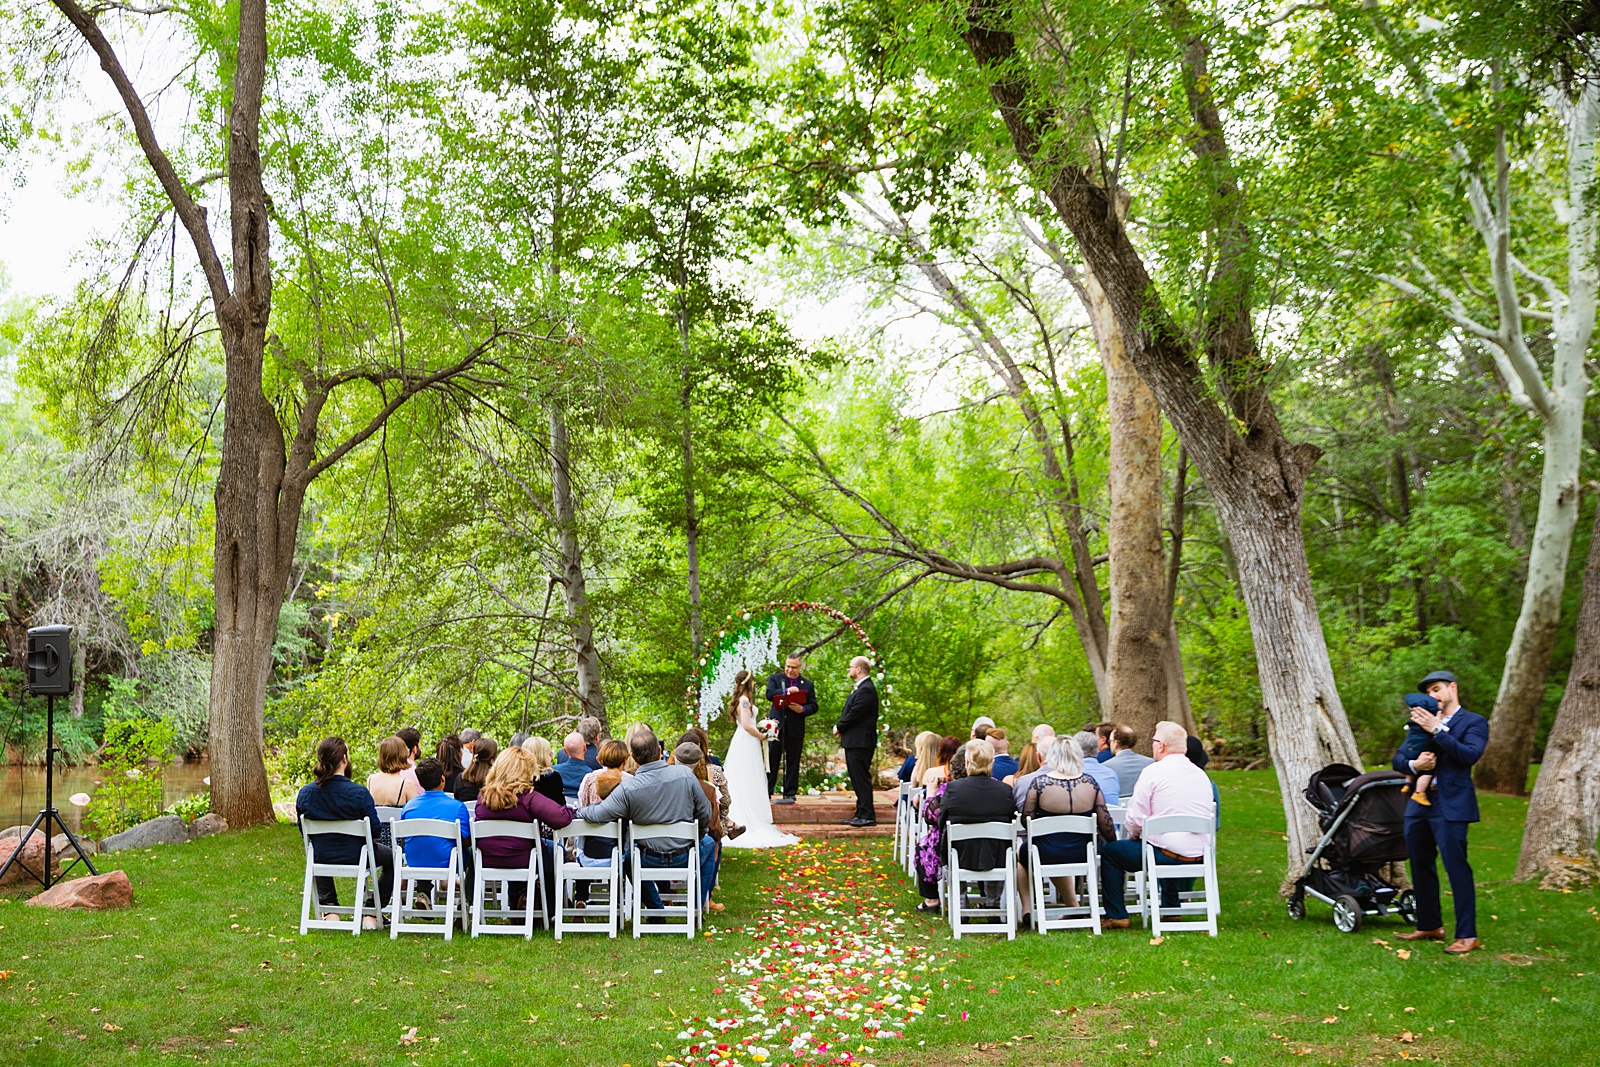 Wedding guests watching the wedding ceremony at Los Abrigados by Sedona wedding photographer PMA Photography.